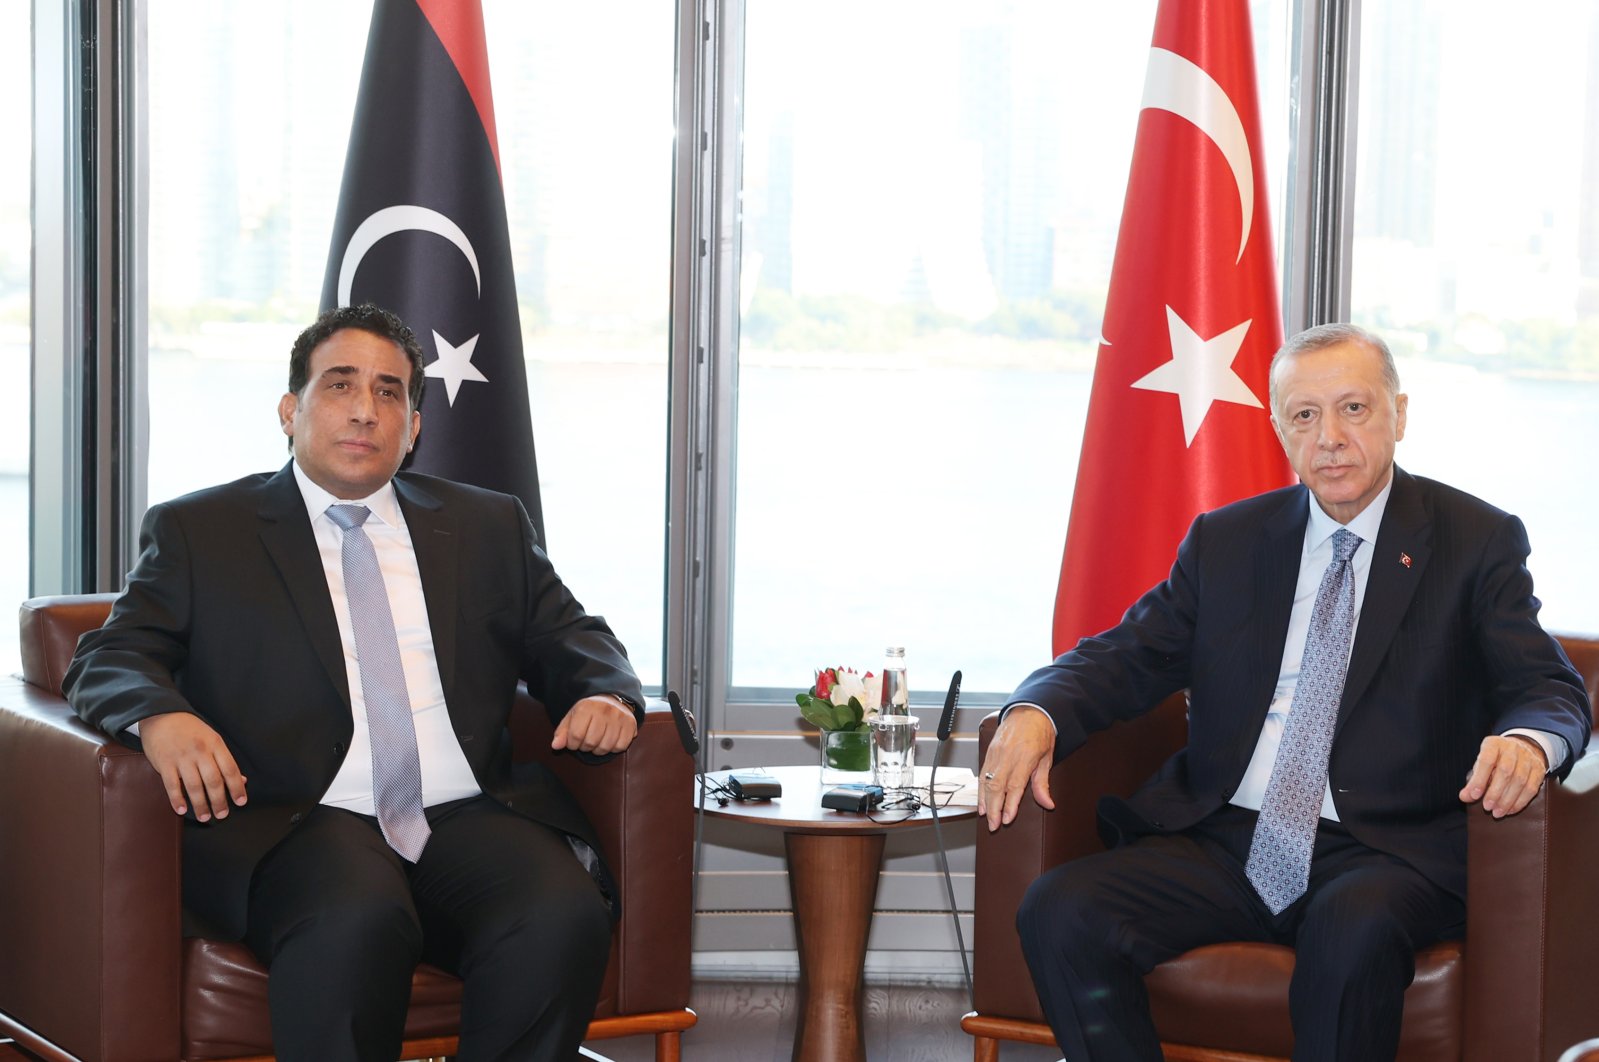 President Recep Tayyip Erdoğan receives the chairperson of the Libyan Presidential Council Mohammad Younes Menfi at Turkish House (Türkevi), New York, U.S., Sept. 18, 2022. (AA Photo)